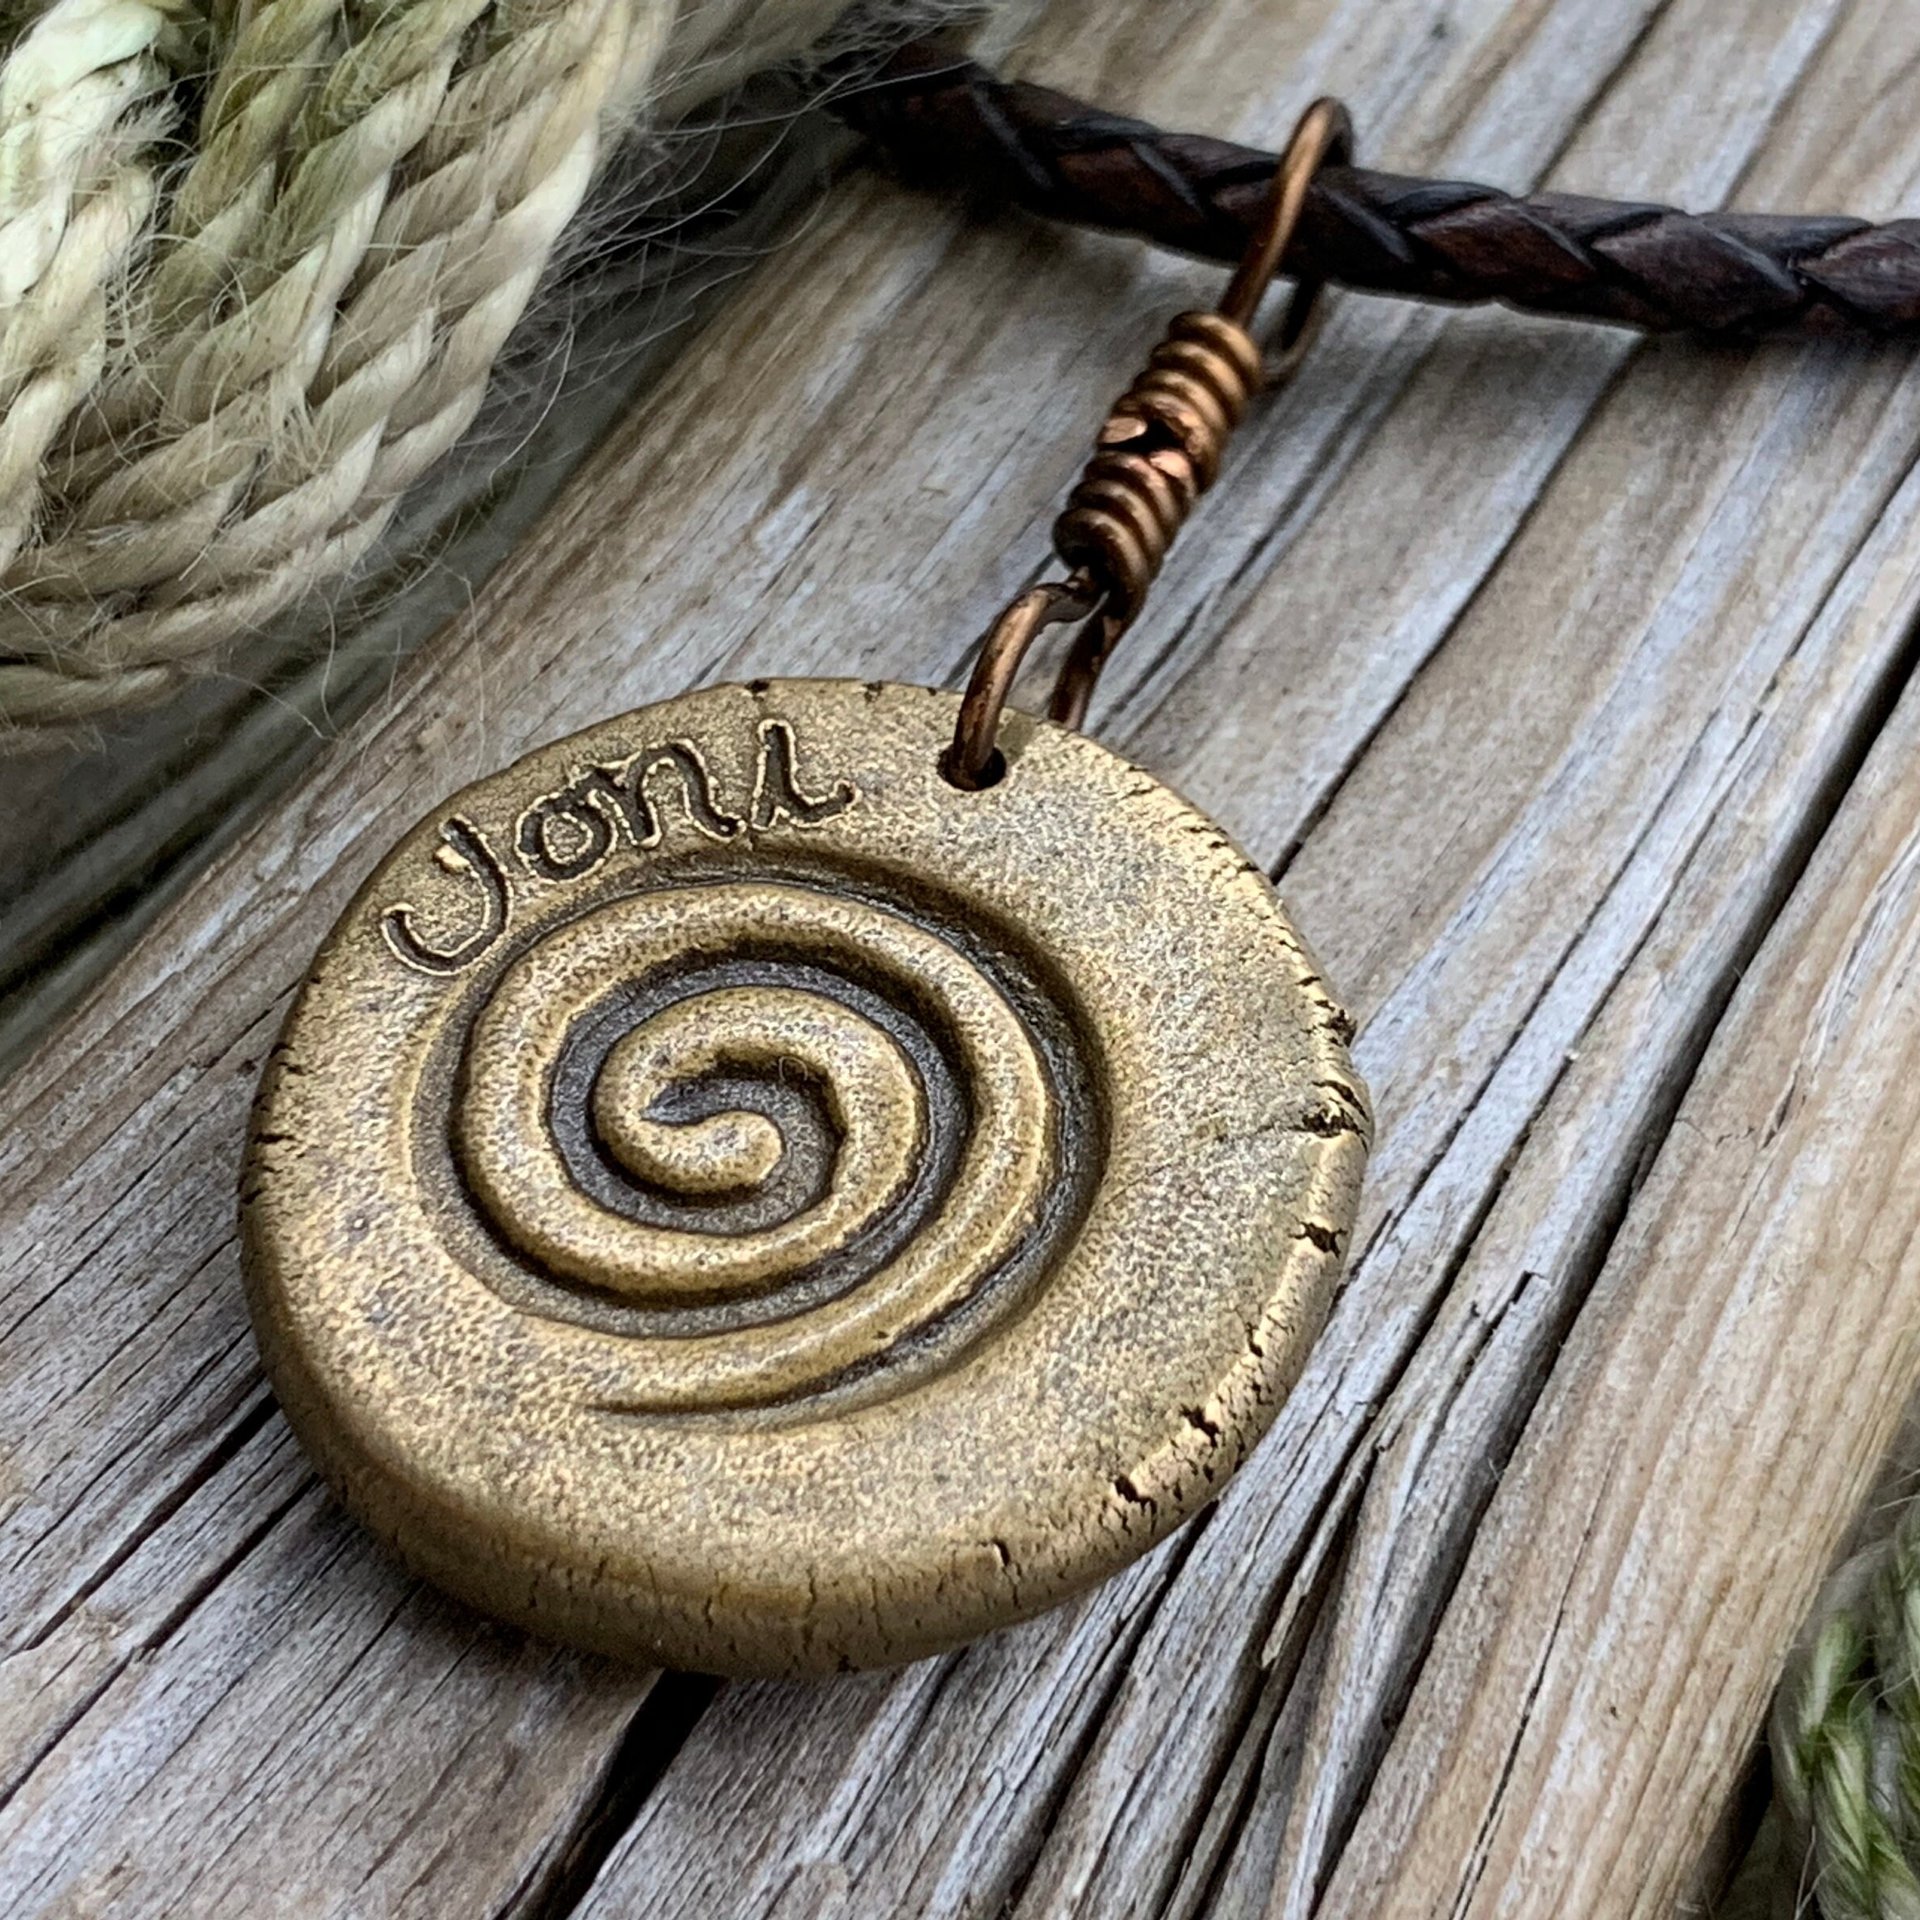 Compass Rose Charm, Bronze Compass Necklace, Nautical Sailing Gifts, Protection Guidance Talisman, Men's Jewelry, Grad Gifts, Handmade Art